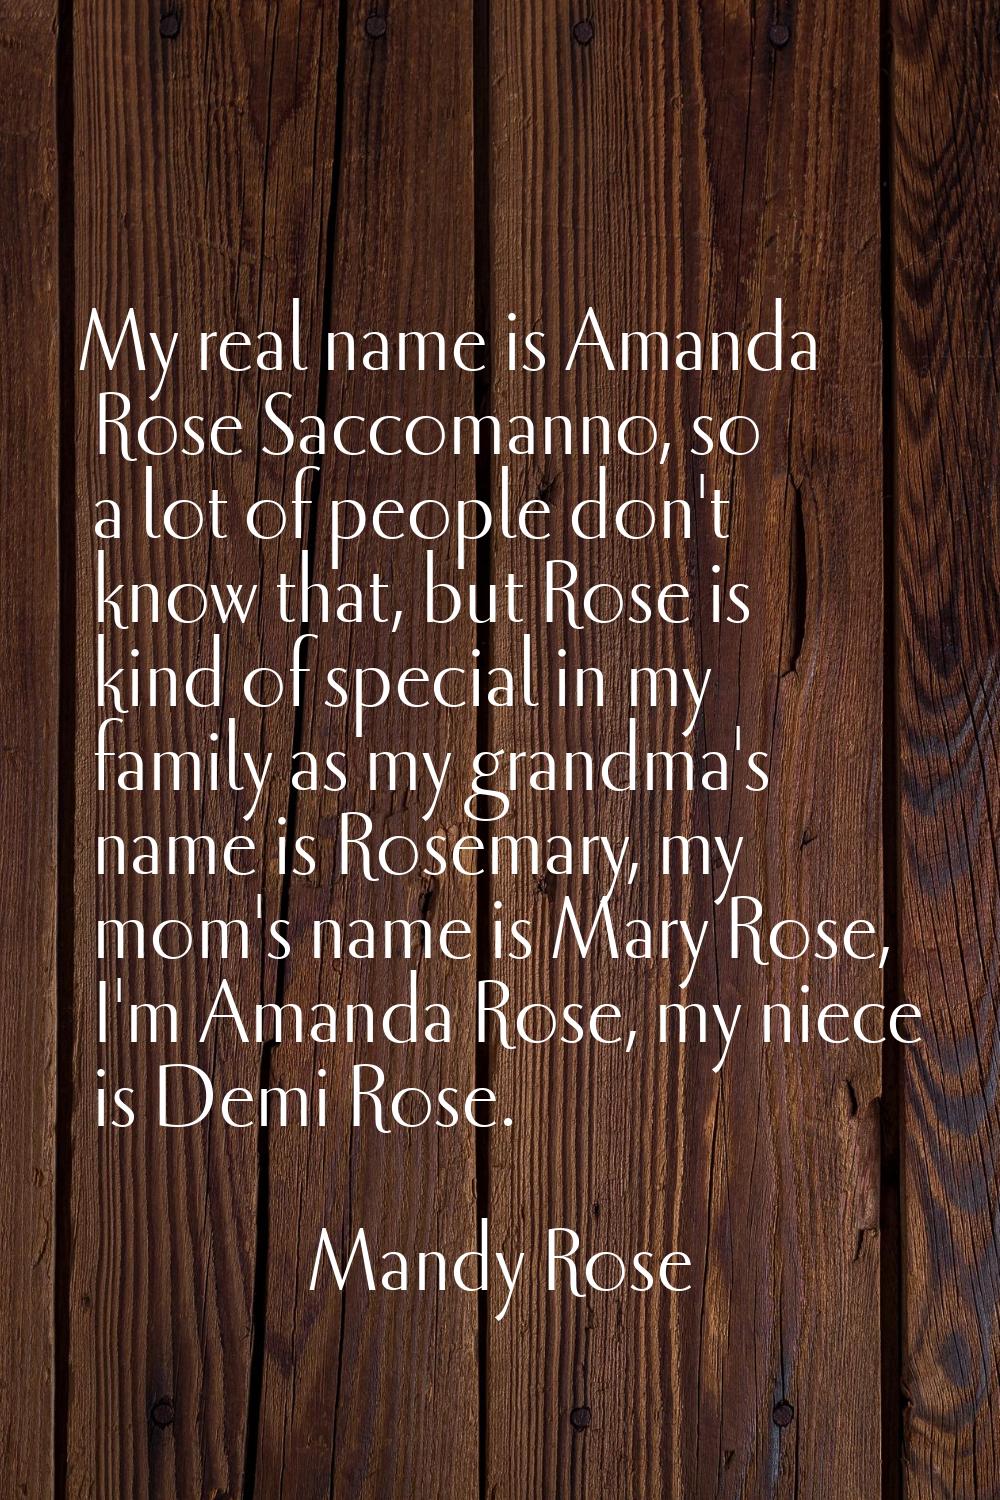 My real name is Amanda Rose Saccomanno, so a lot of people don't know that, but Rose is kind of spe